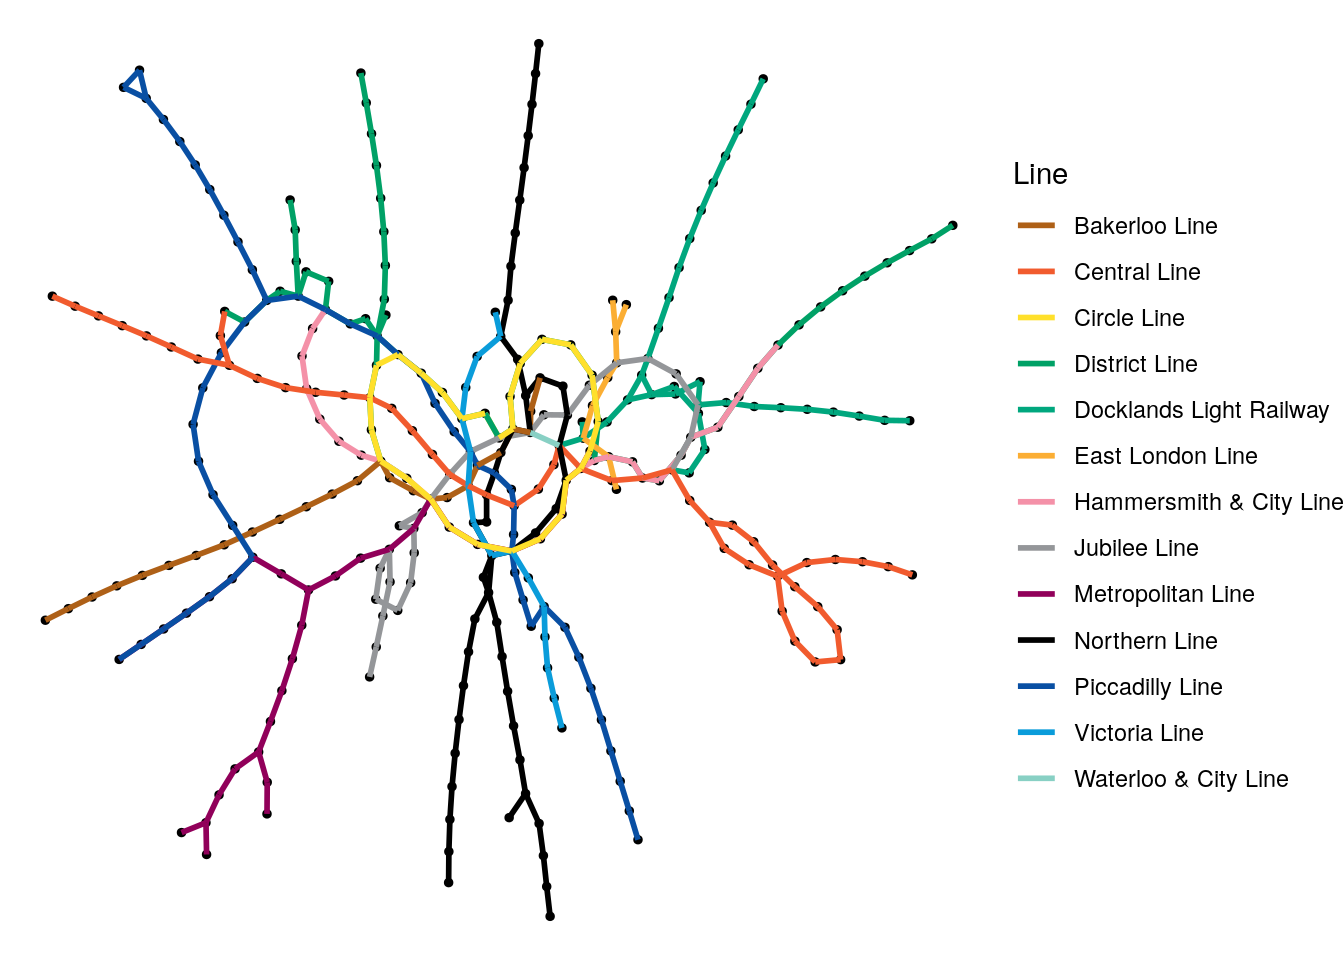 Random graph visualization of the London Tube network graph with the edges colored by the different lines